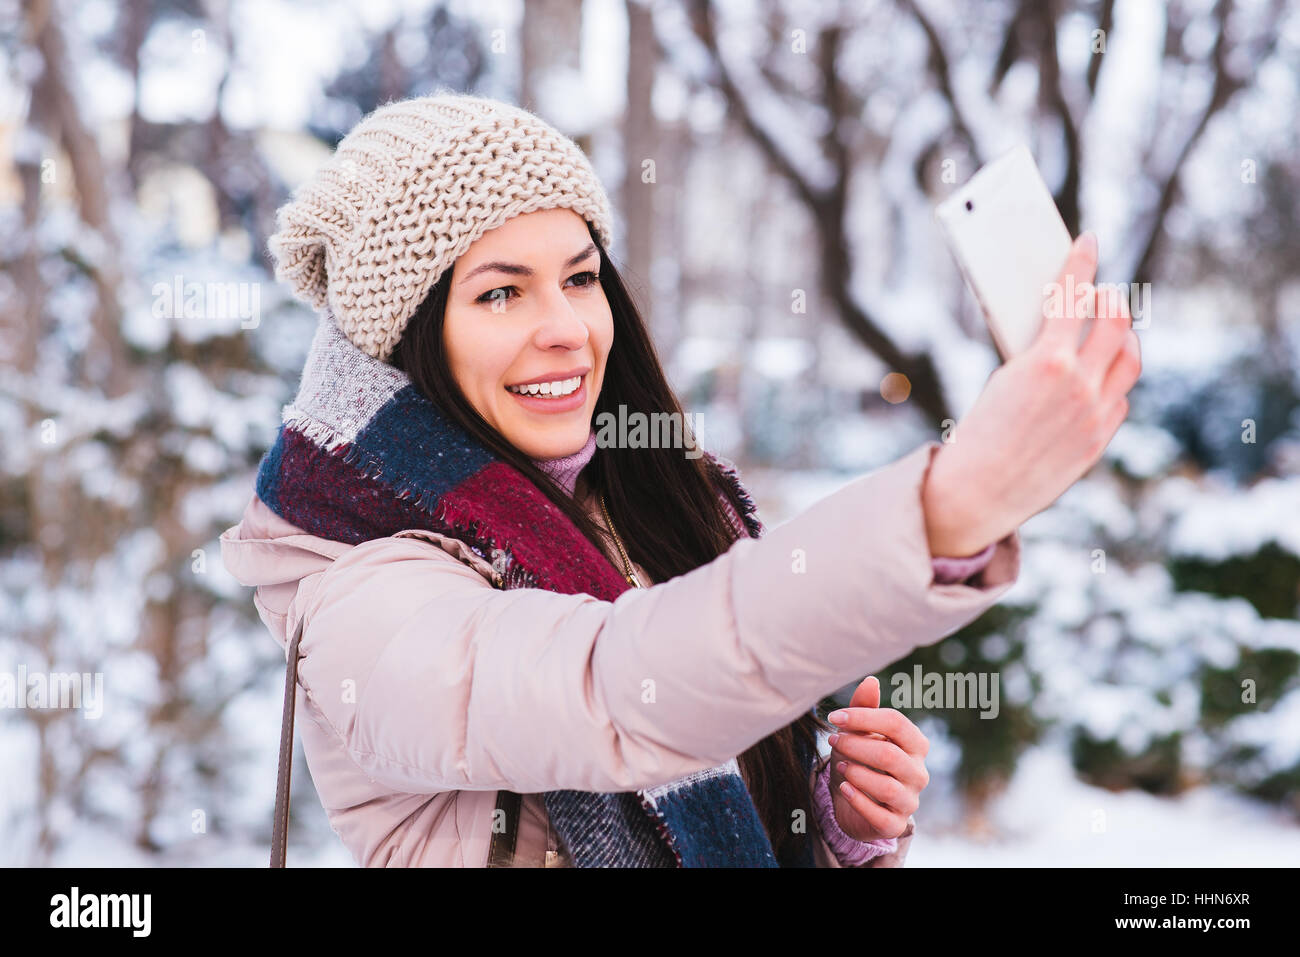 Young woman taking self portrait with smart phone piscine Banque D'Images